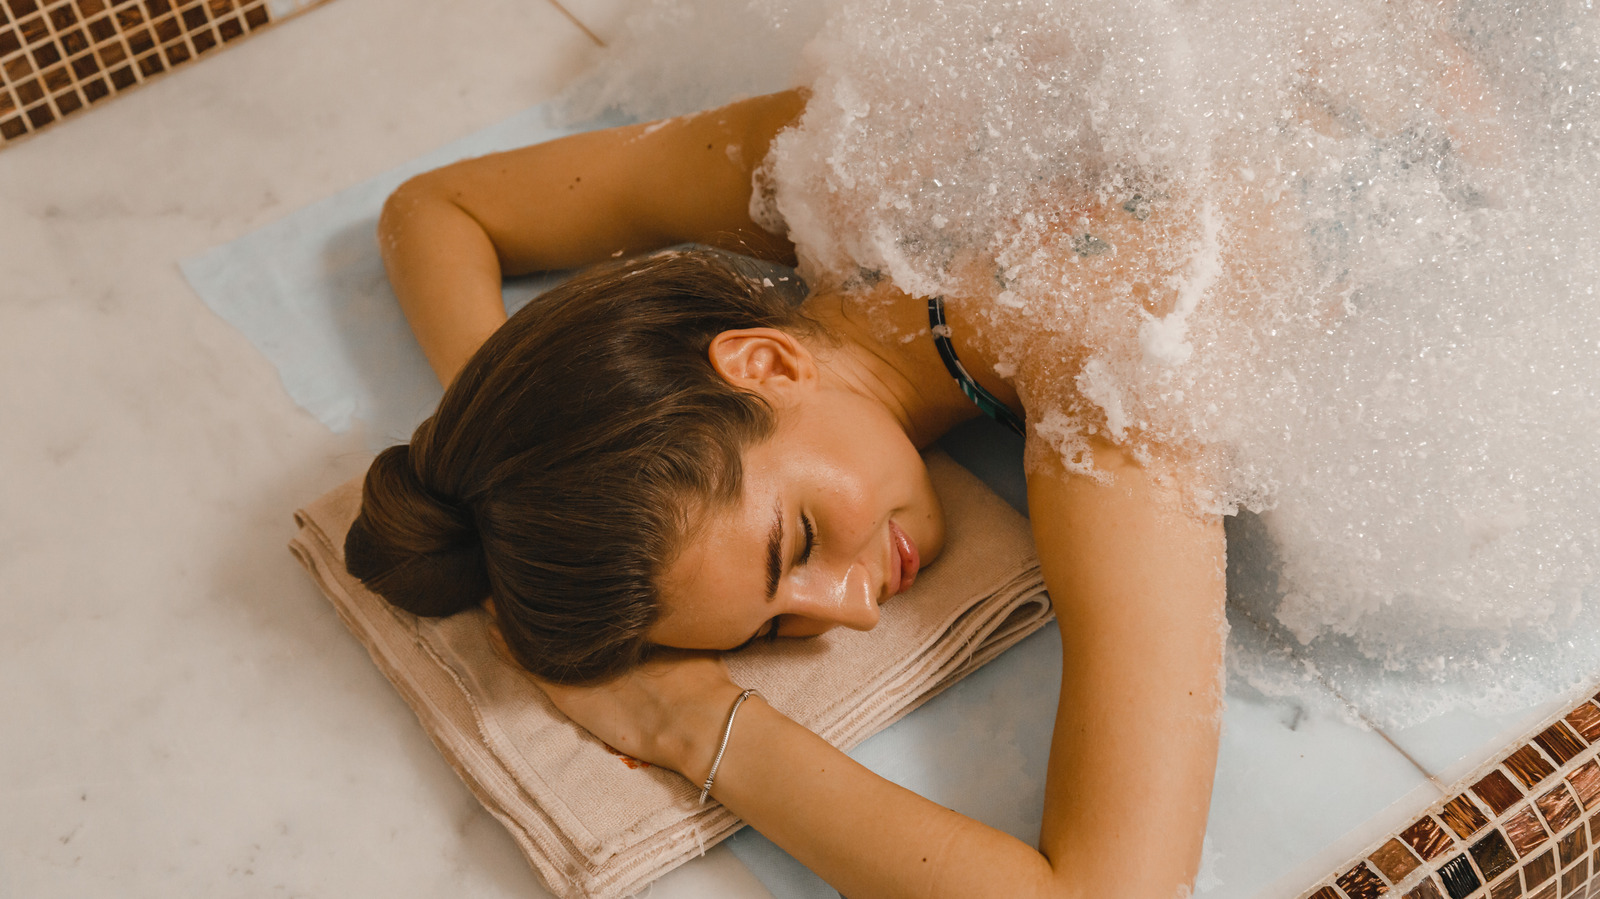 Taiko buik Elementair Bonus Everything You Need To Know Before Trying A Hammam Bubble Massage